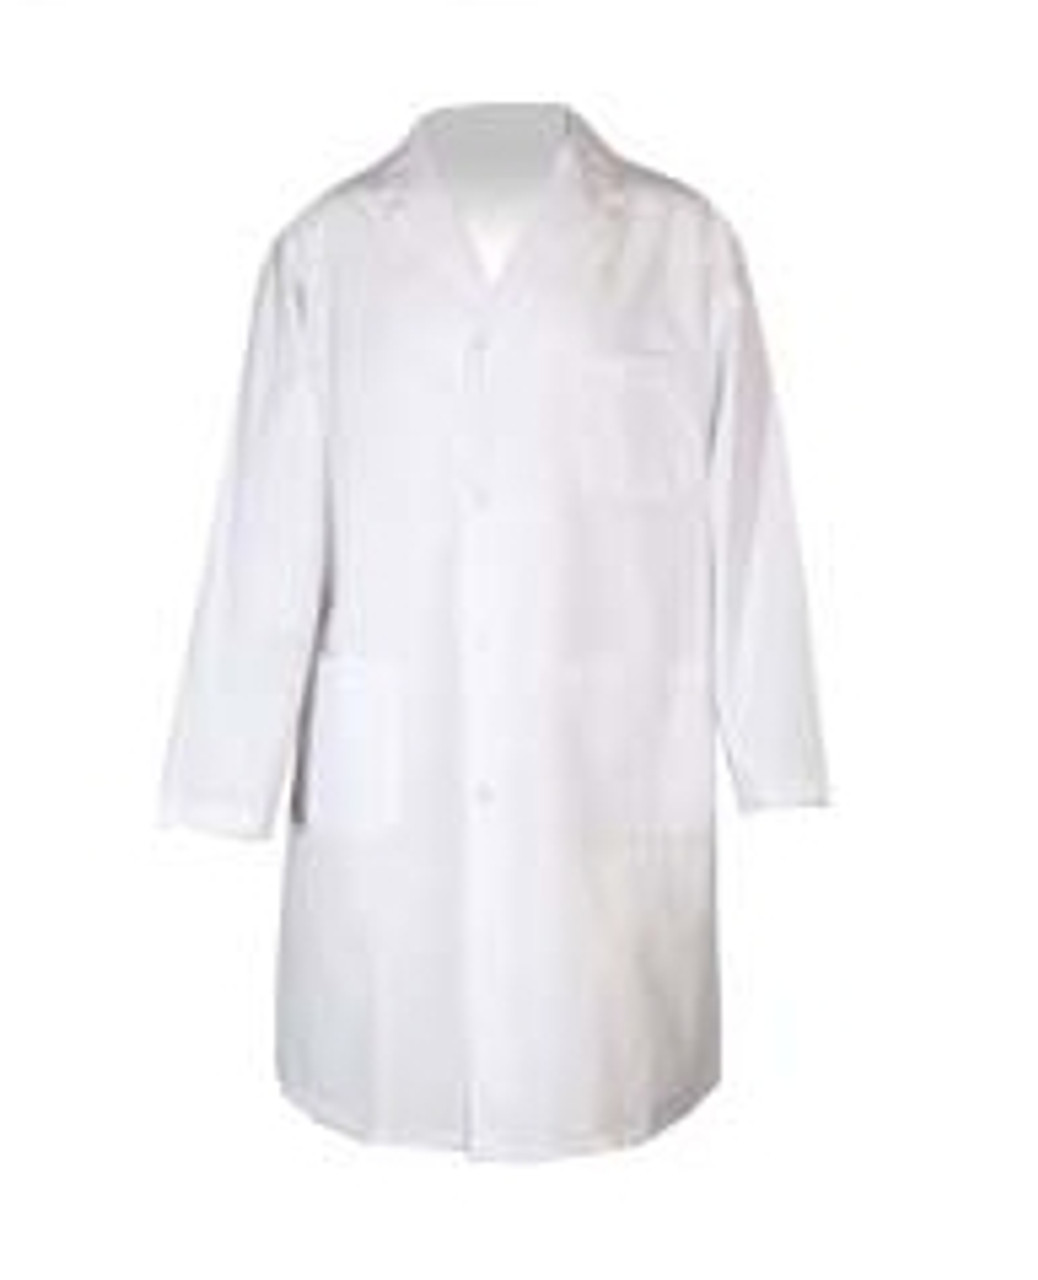 COAT LAB WHITE UNISEX LARGE BUTTON STYLE w/3 POCKETS SZ 44-46in (920-70443)